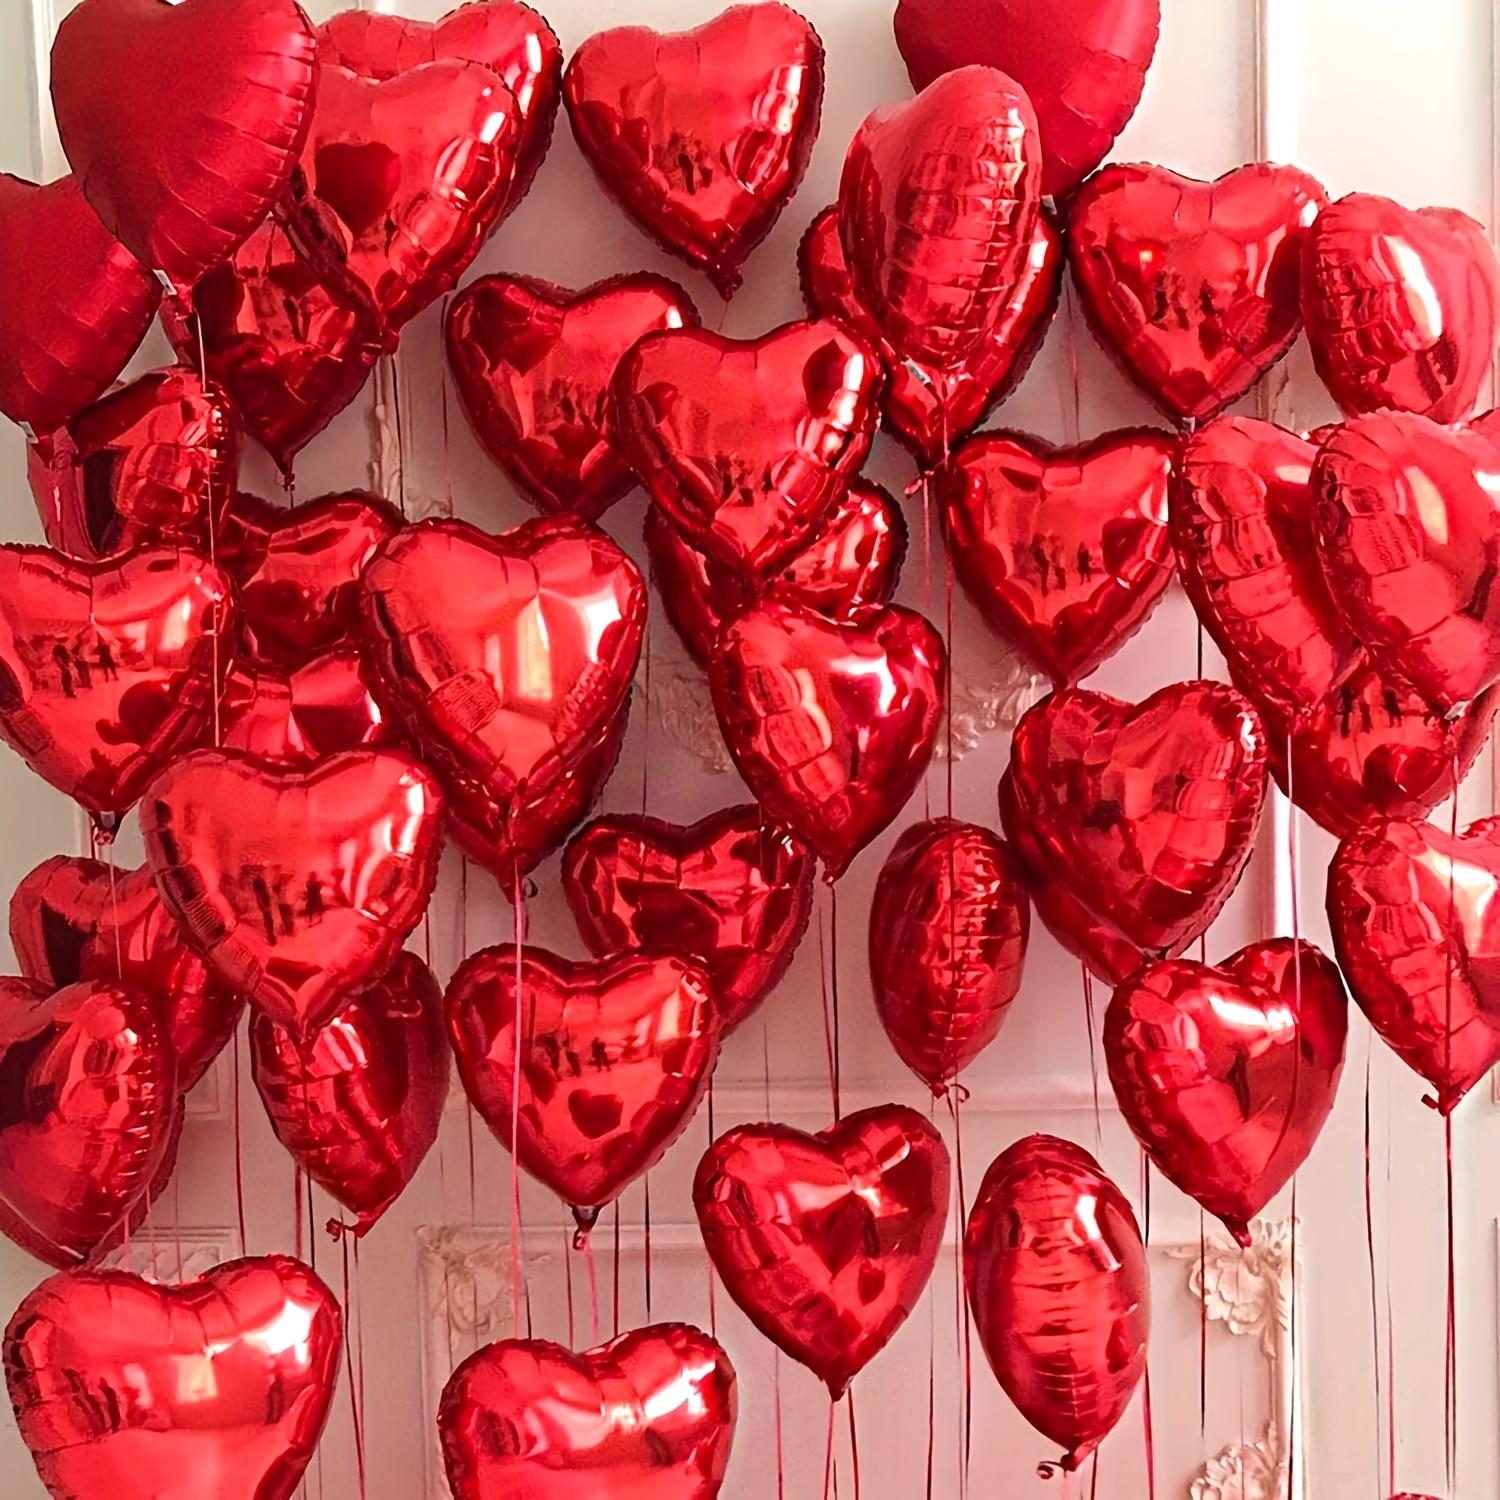 

21pcs/set, 20 Red Heart Love Bunch Foil Balloon And 1 Ribbon, 10inch Helium Support Valentines Day Wedding Bridal Engagement Party Anniversary Decorations